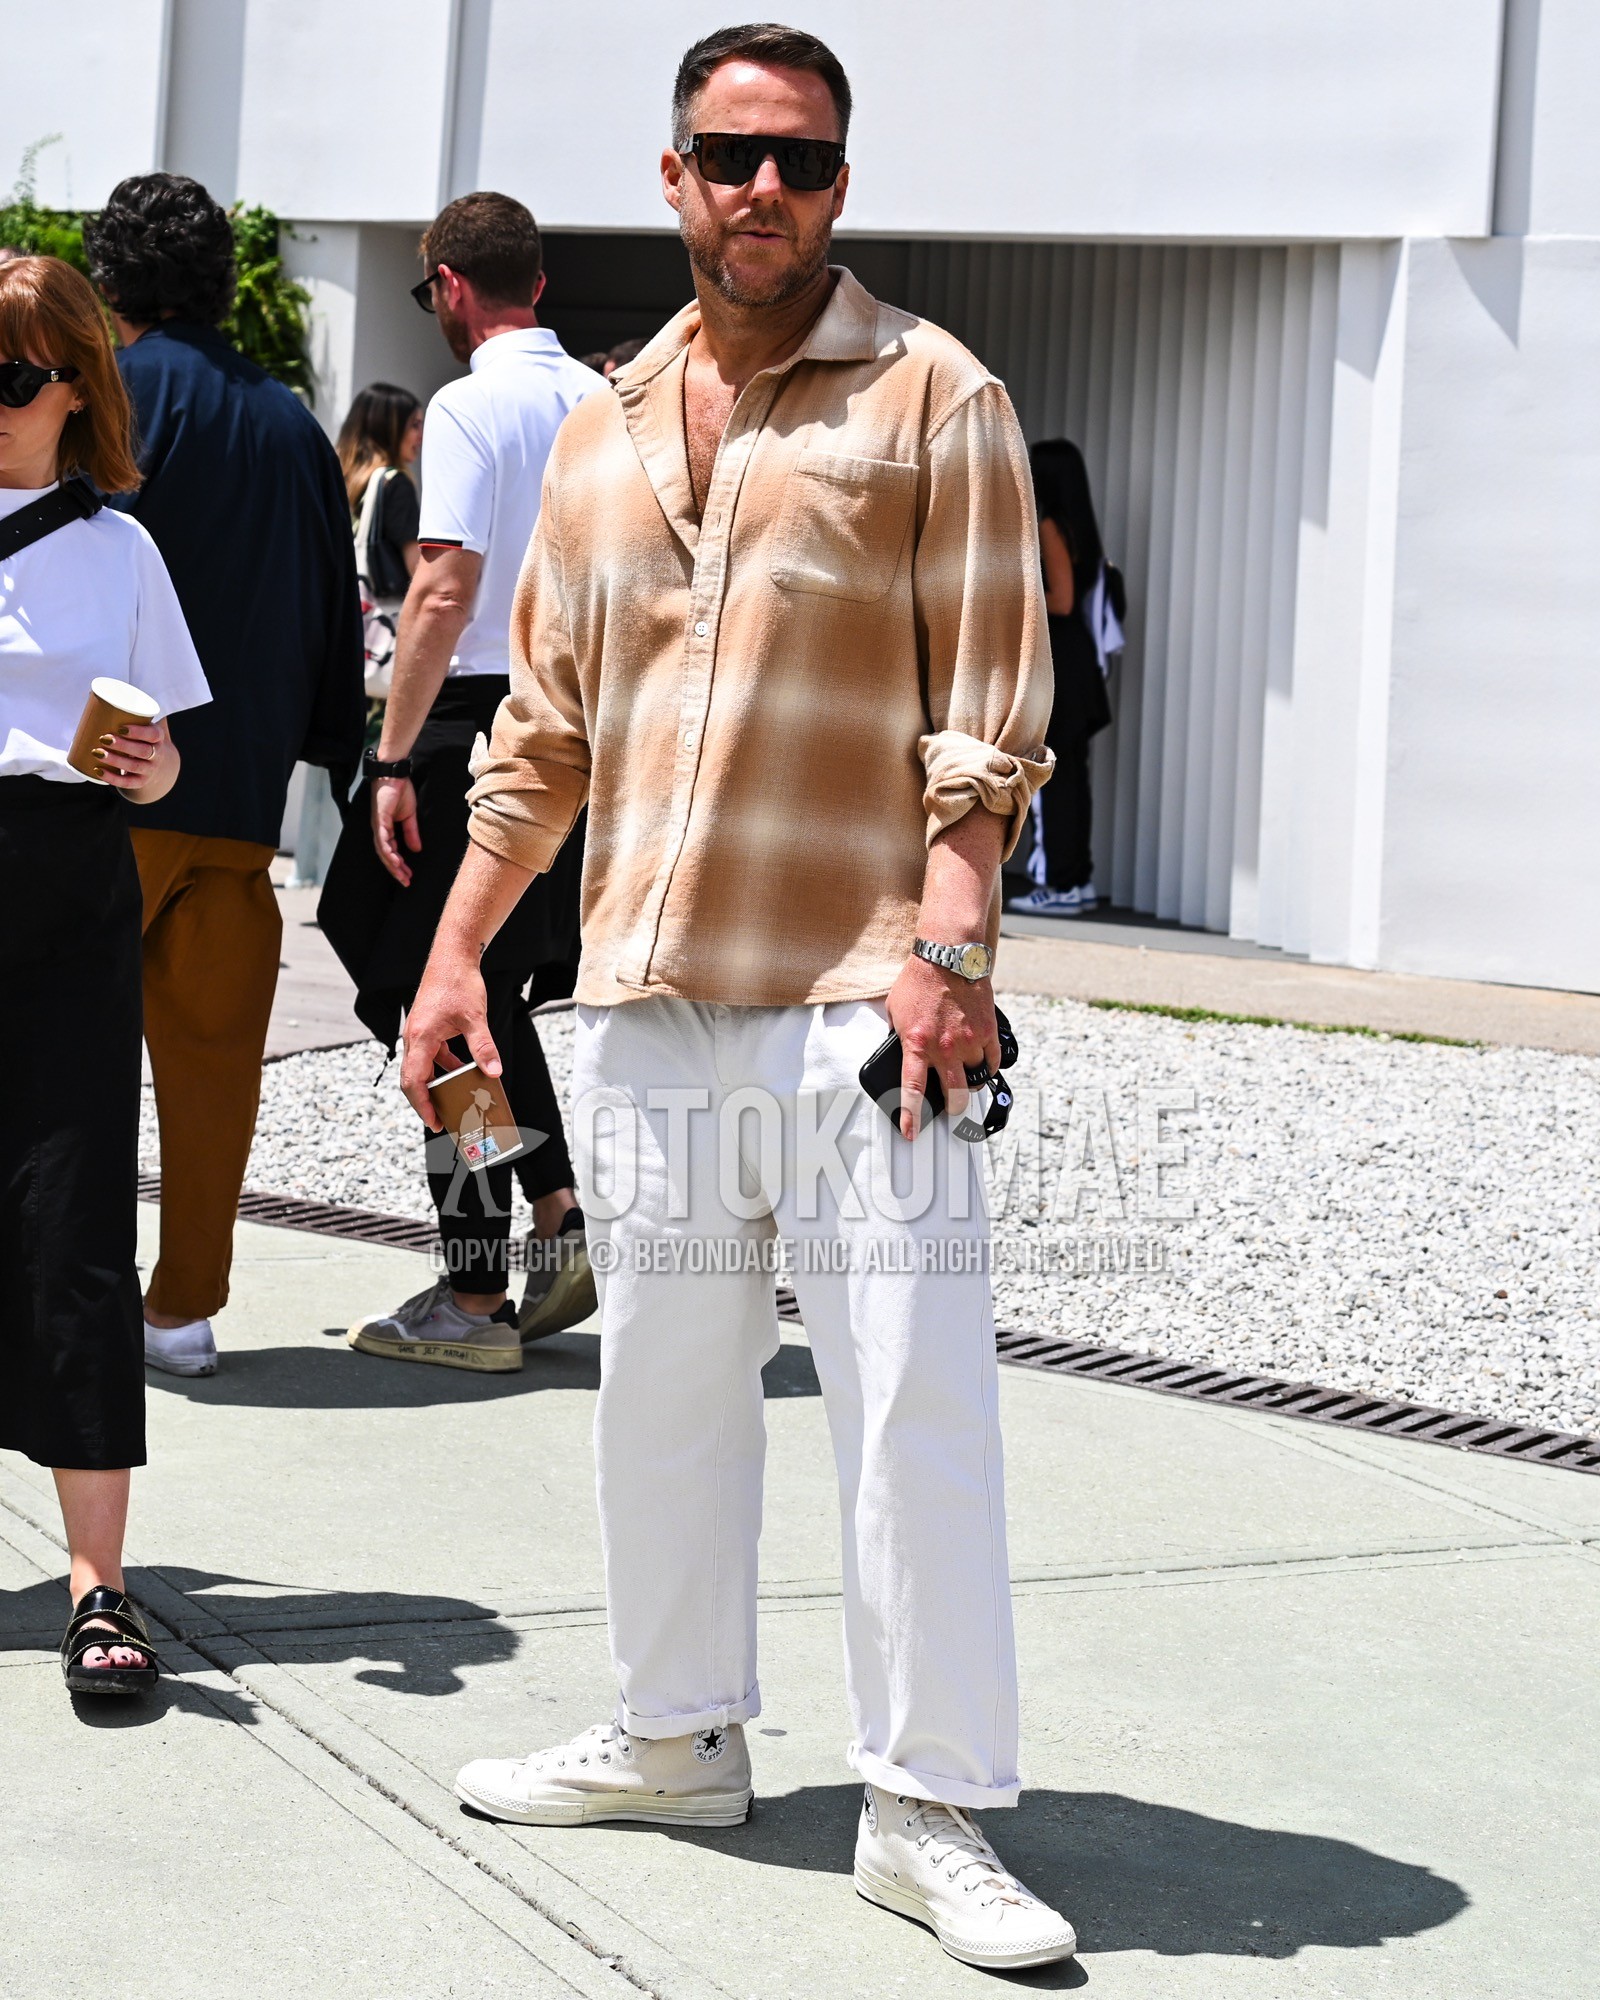 Men's spring summer outfit with black plain sunglasses, beige check shirt, white plain chinos, white low-cut sneakers.